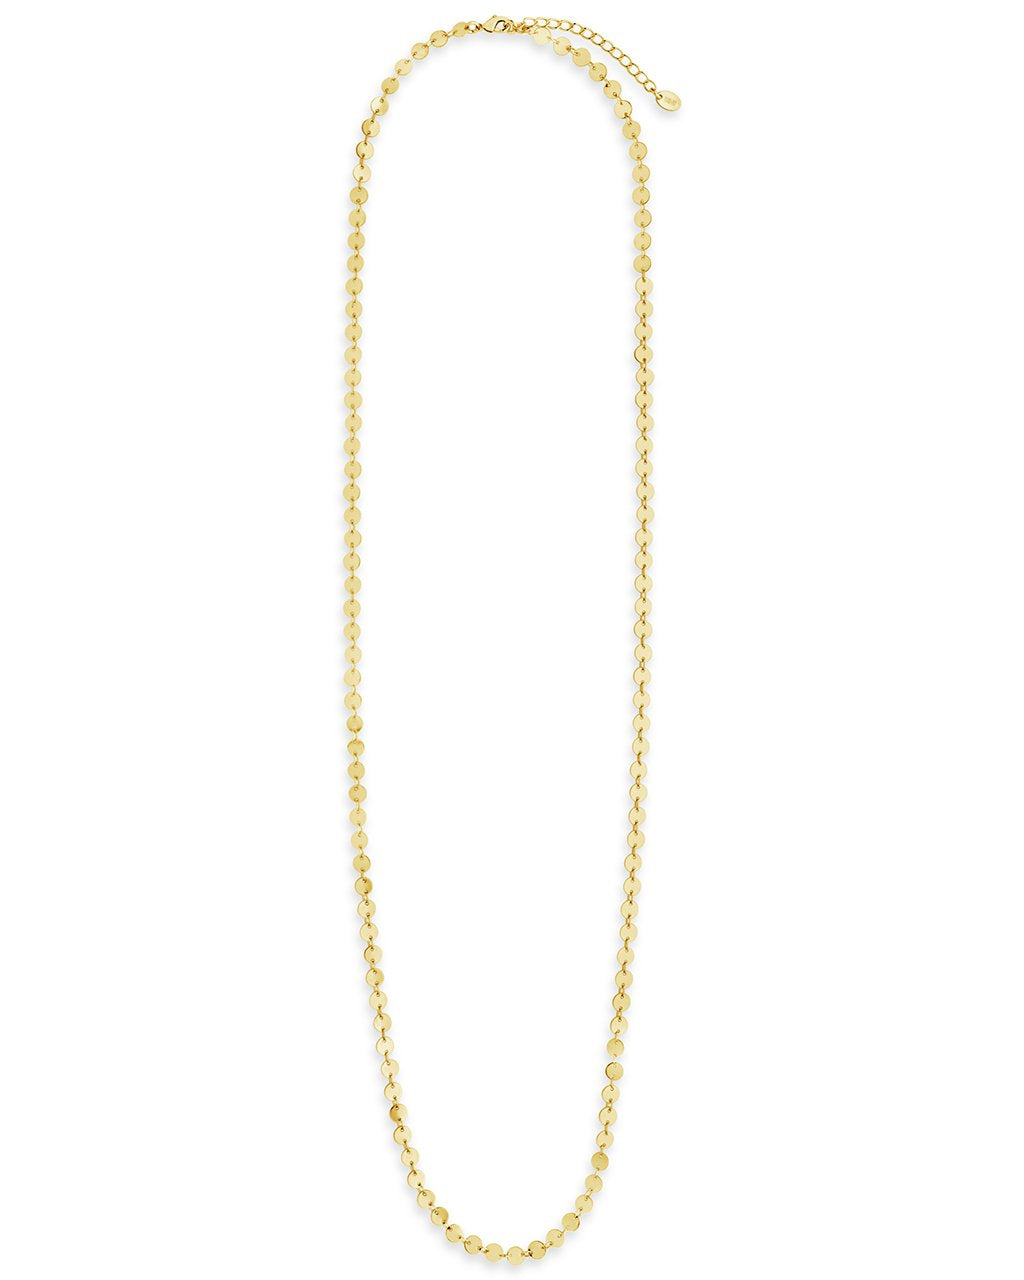 Round Disk Long Chain Necklace - Sterling Forever